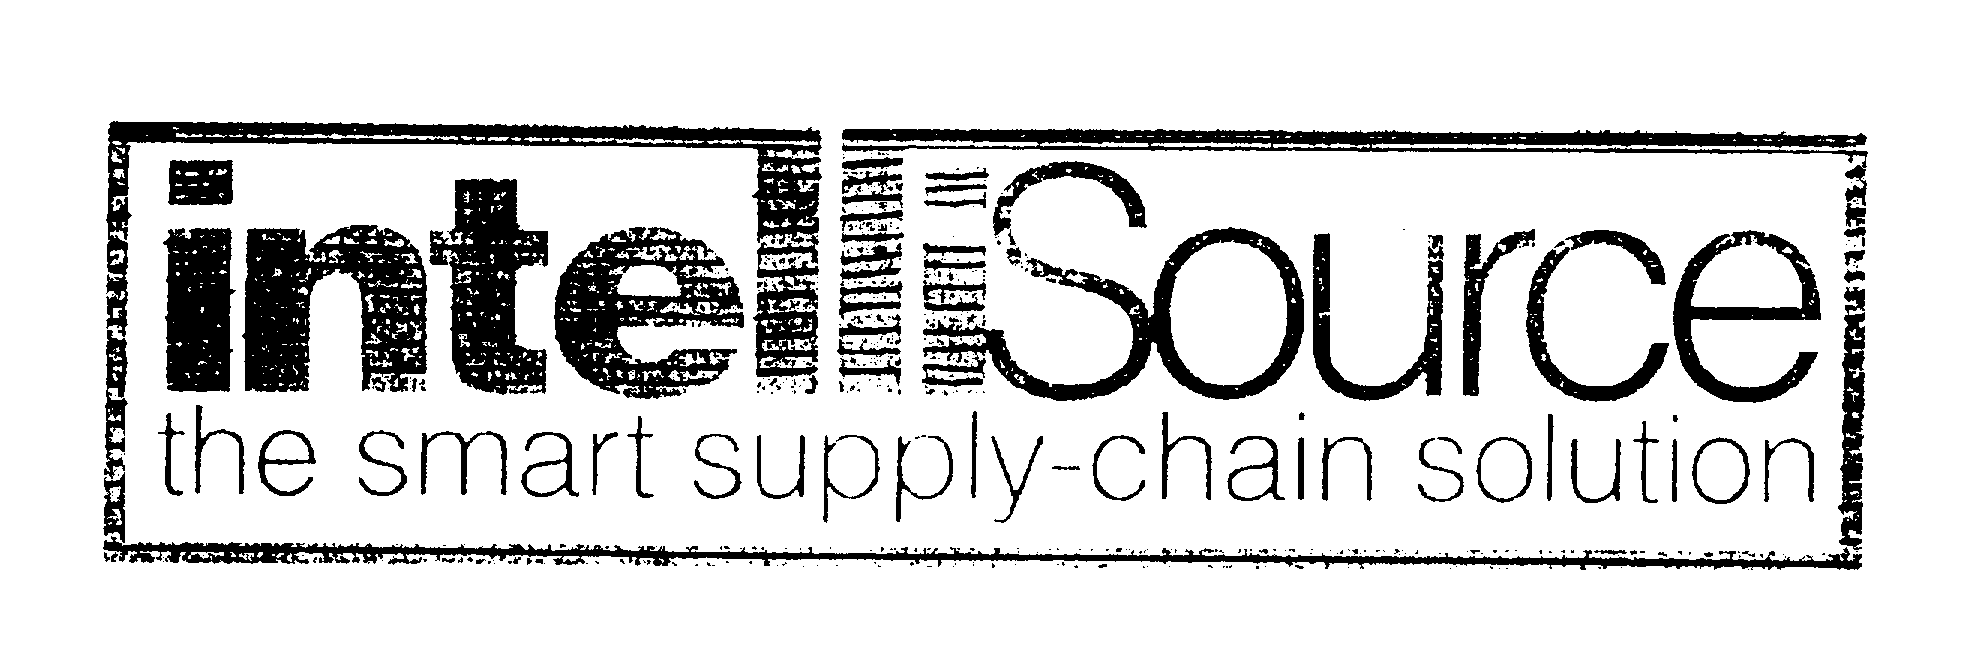  INTELLISOURCE THE SMART SUPPLY-CHAIN SOLUTION